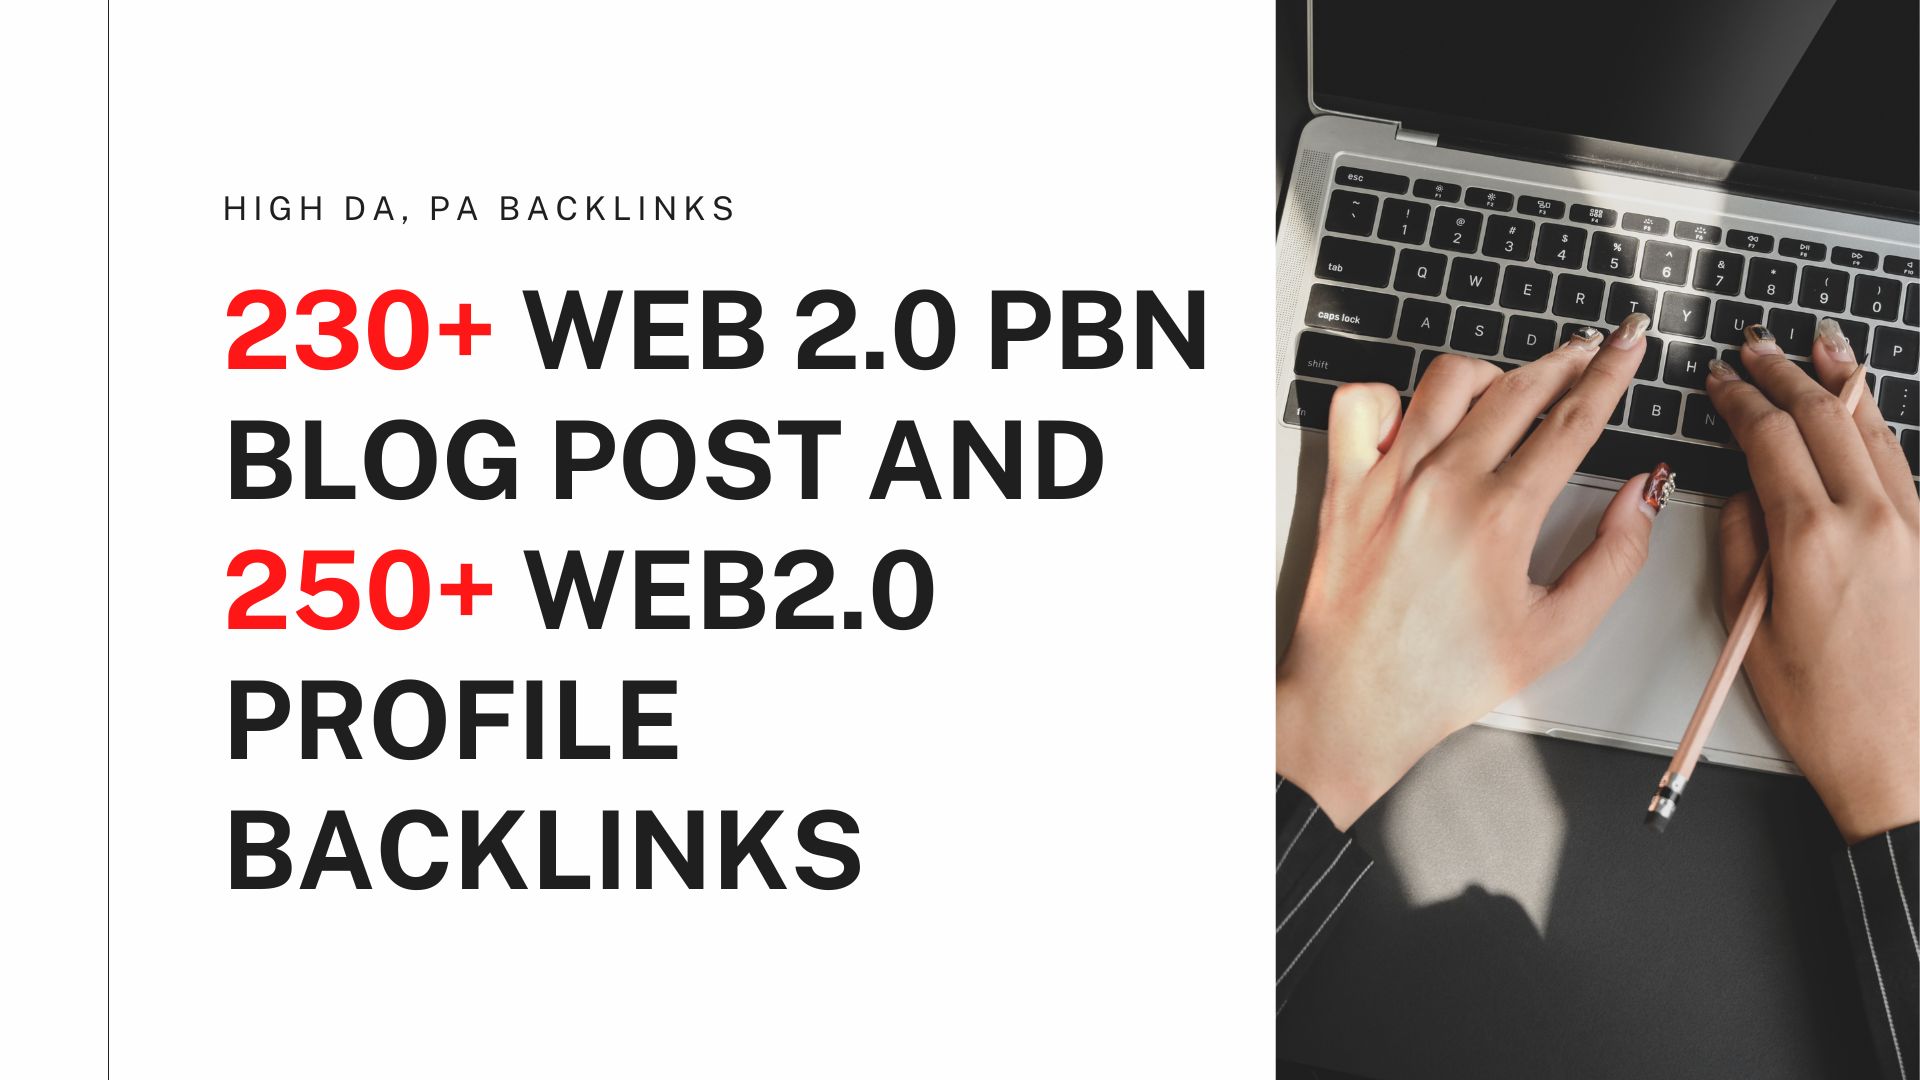 Get 230+ WEB 2.0 PBN Blog post AND 250 Web2.0 Profile backlinks High Quality & Permanent